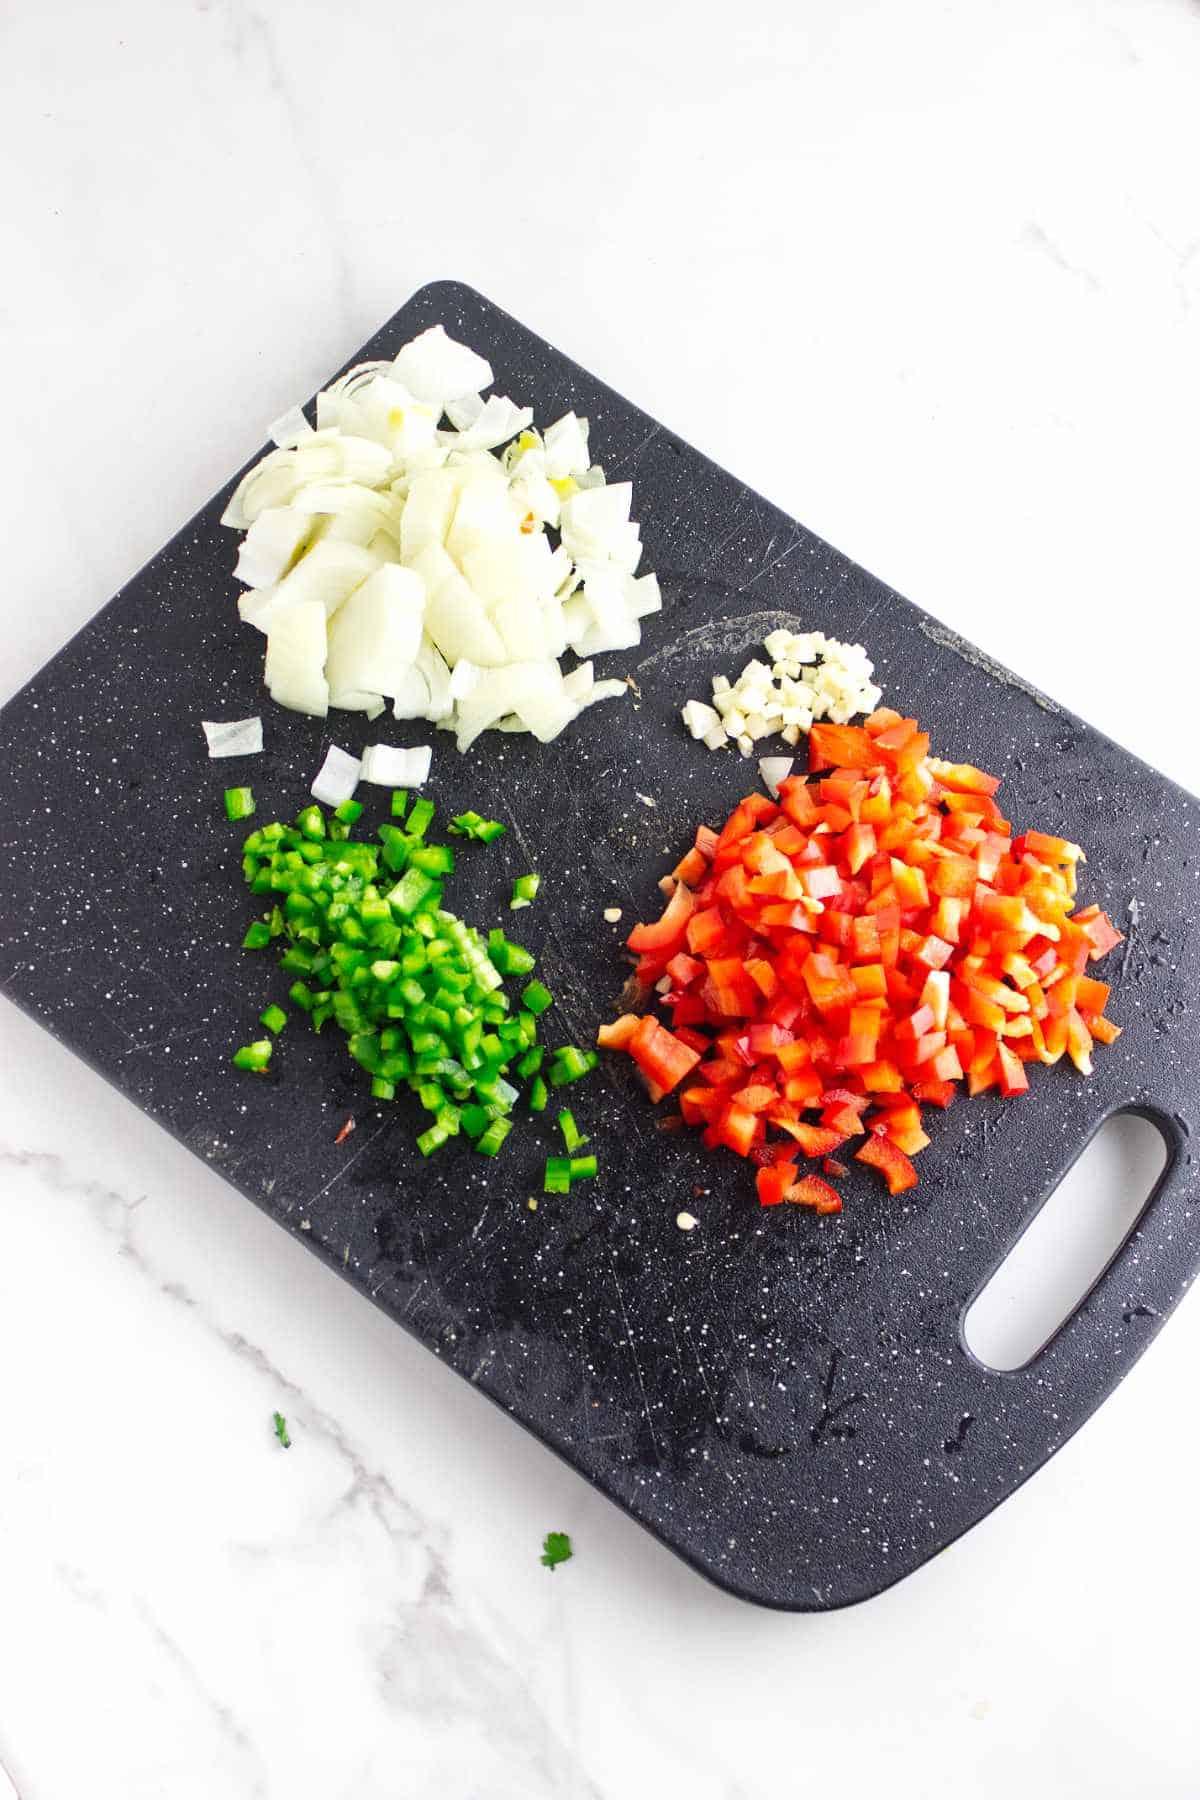 diced jalapeno, red bell pepper, and white onion on a cutting board.